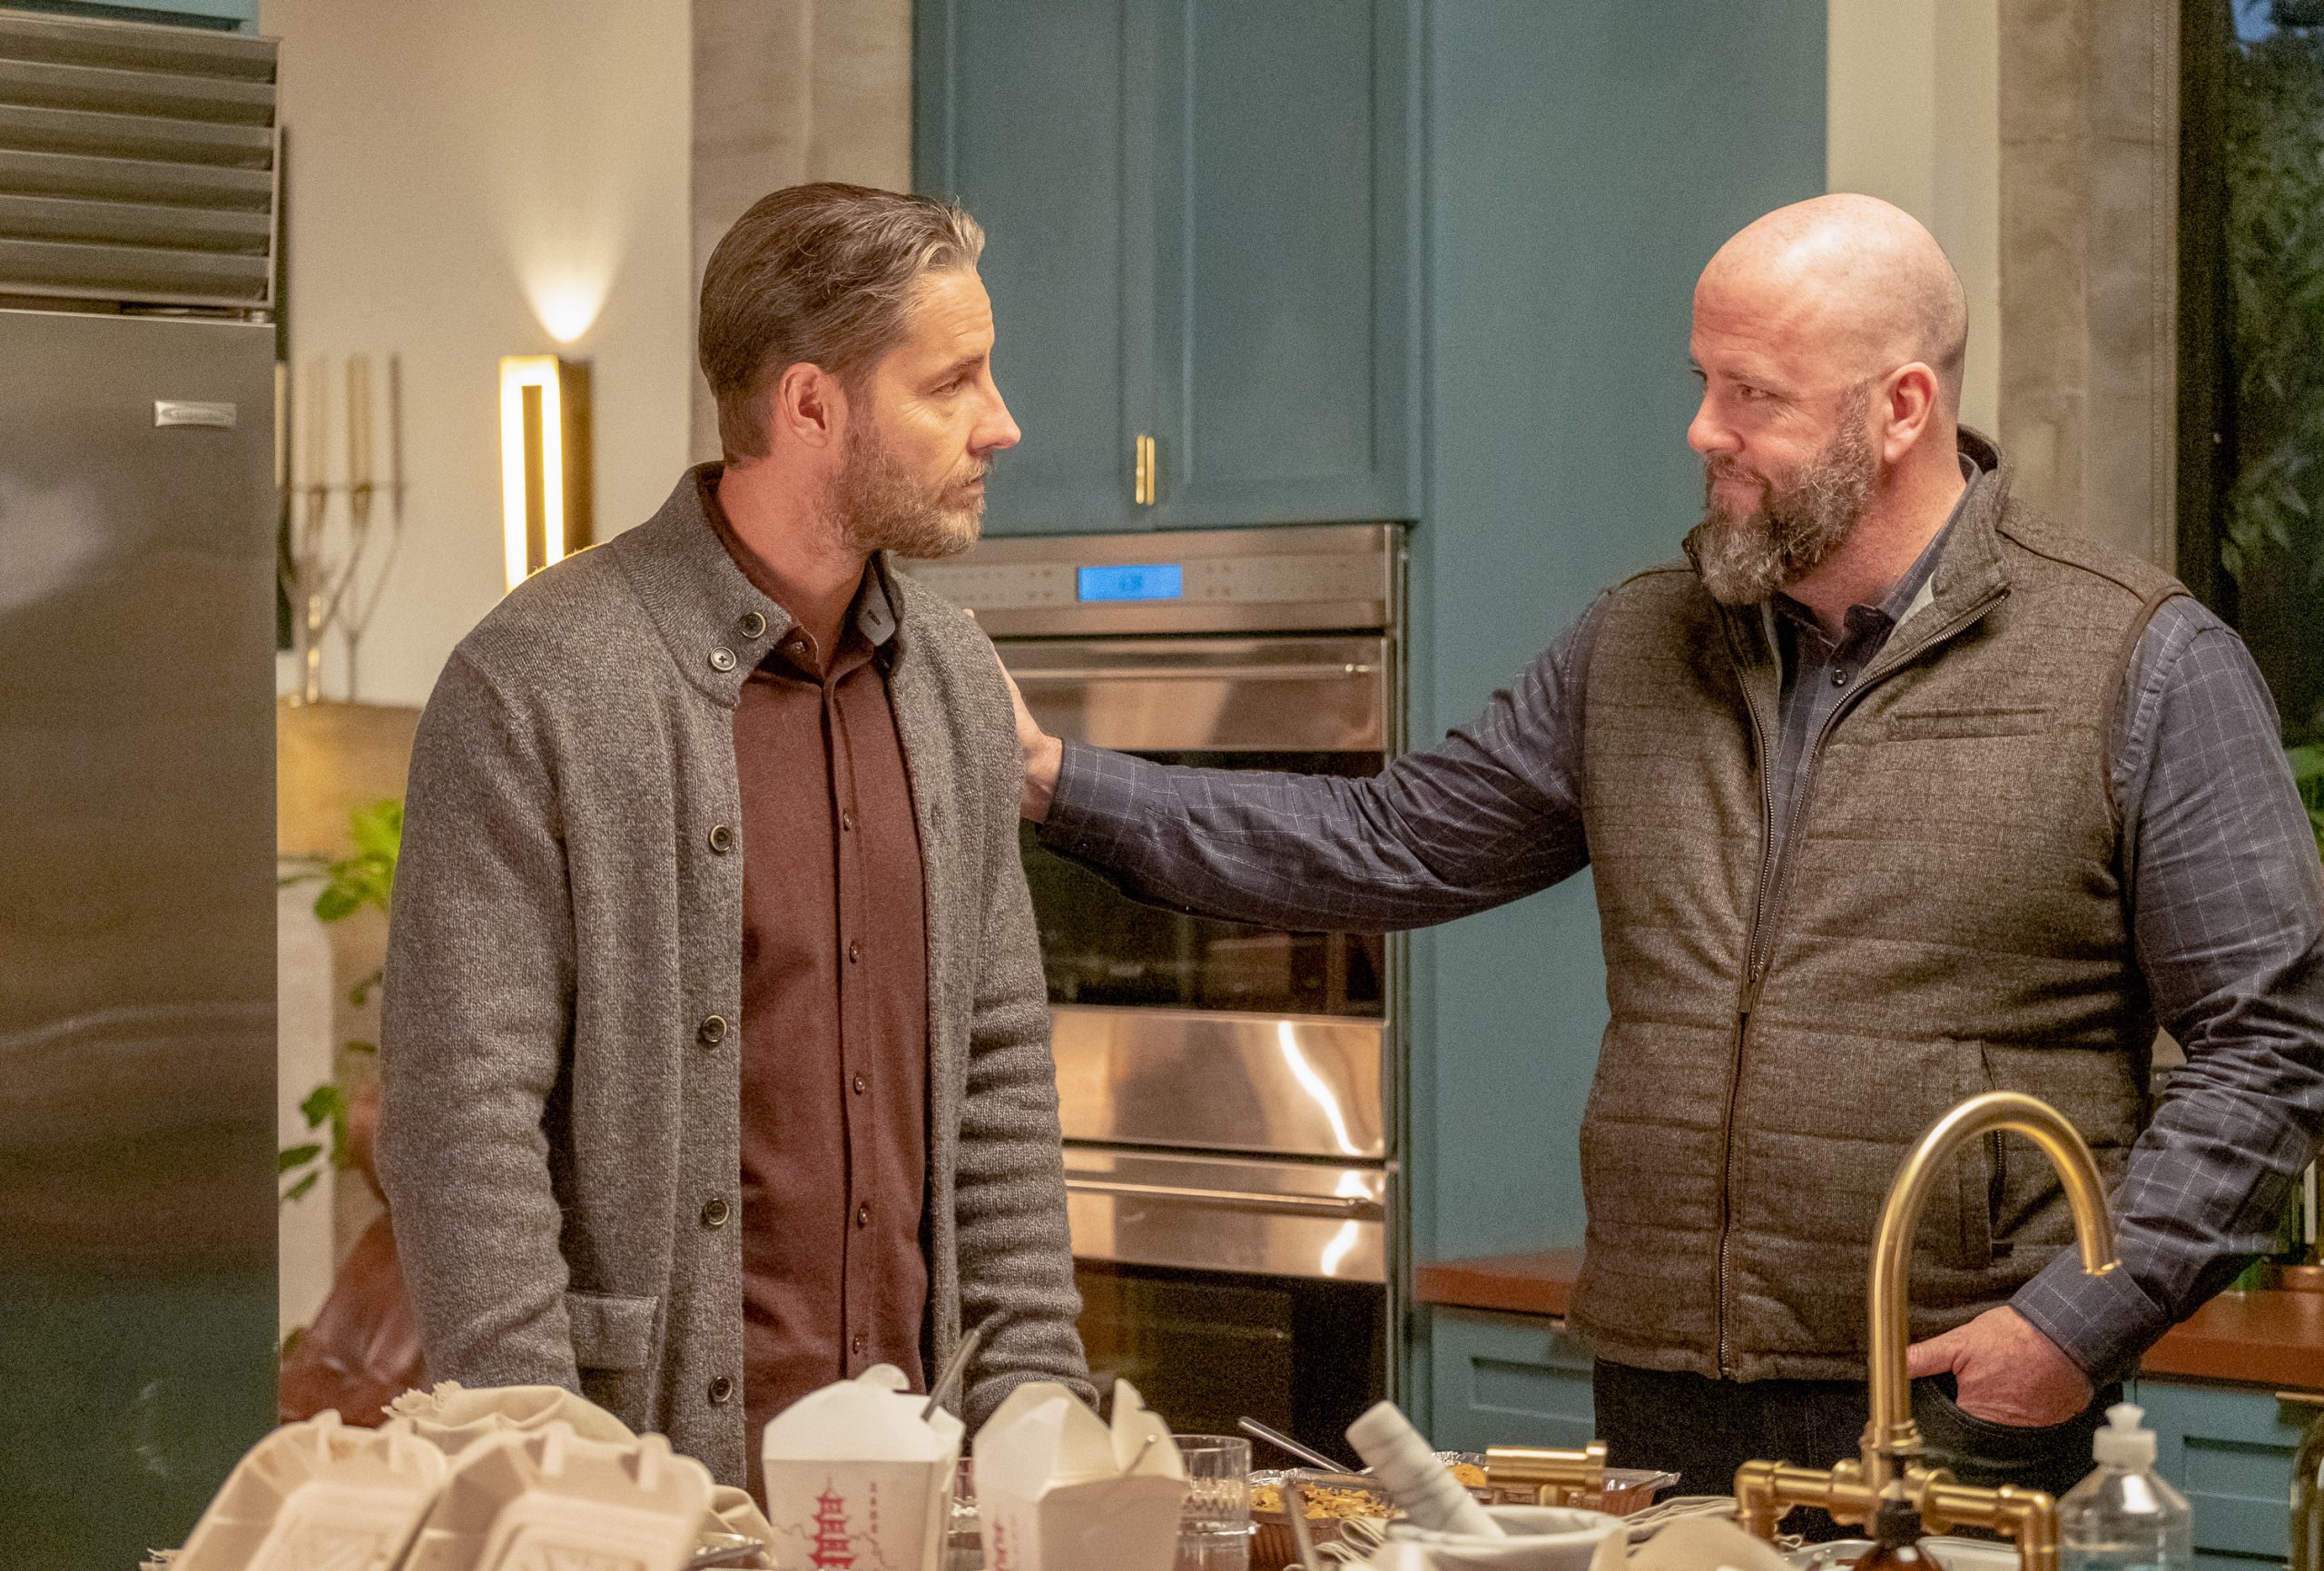 Justin Hartley and Chris Sullivan, in character as Kevin and Toby in the NBC show 'This Is Us,' share a scene.